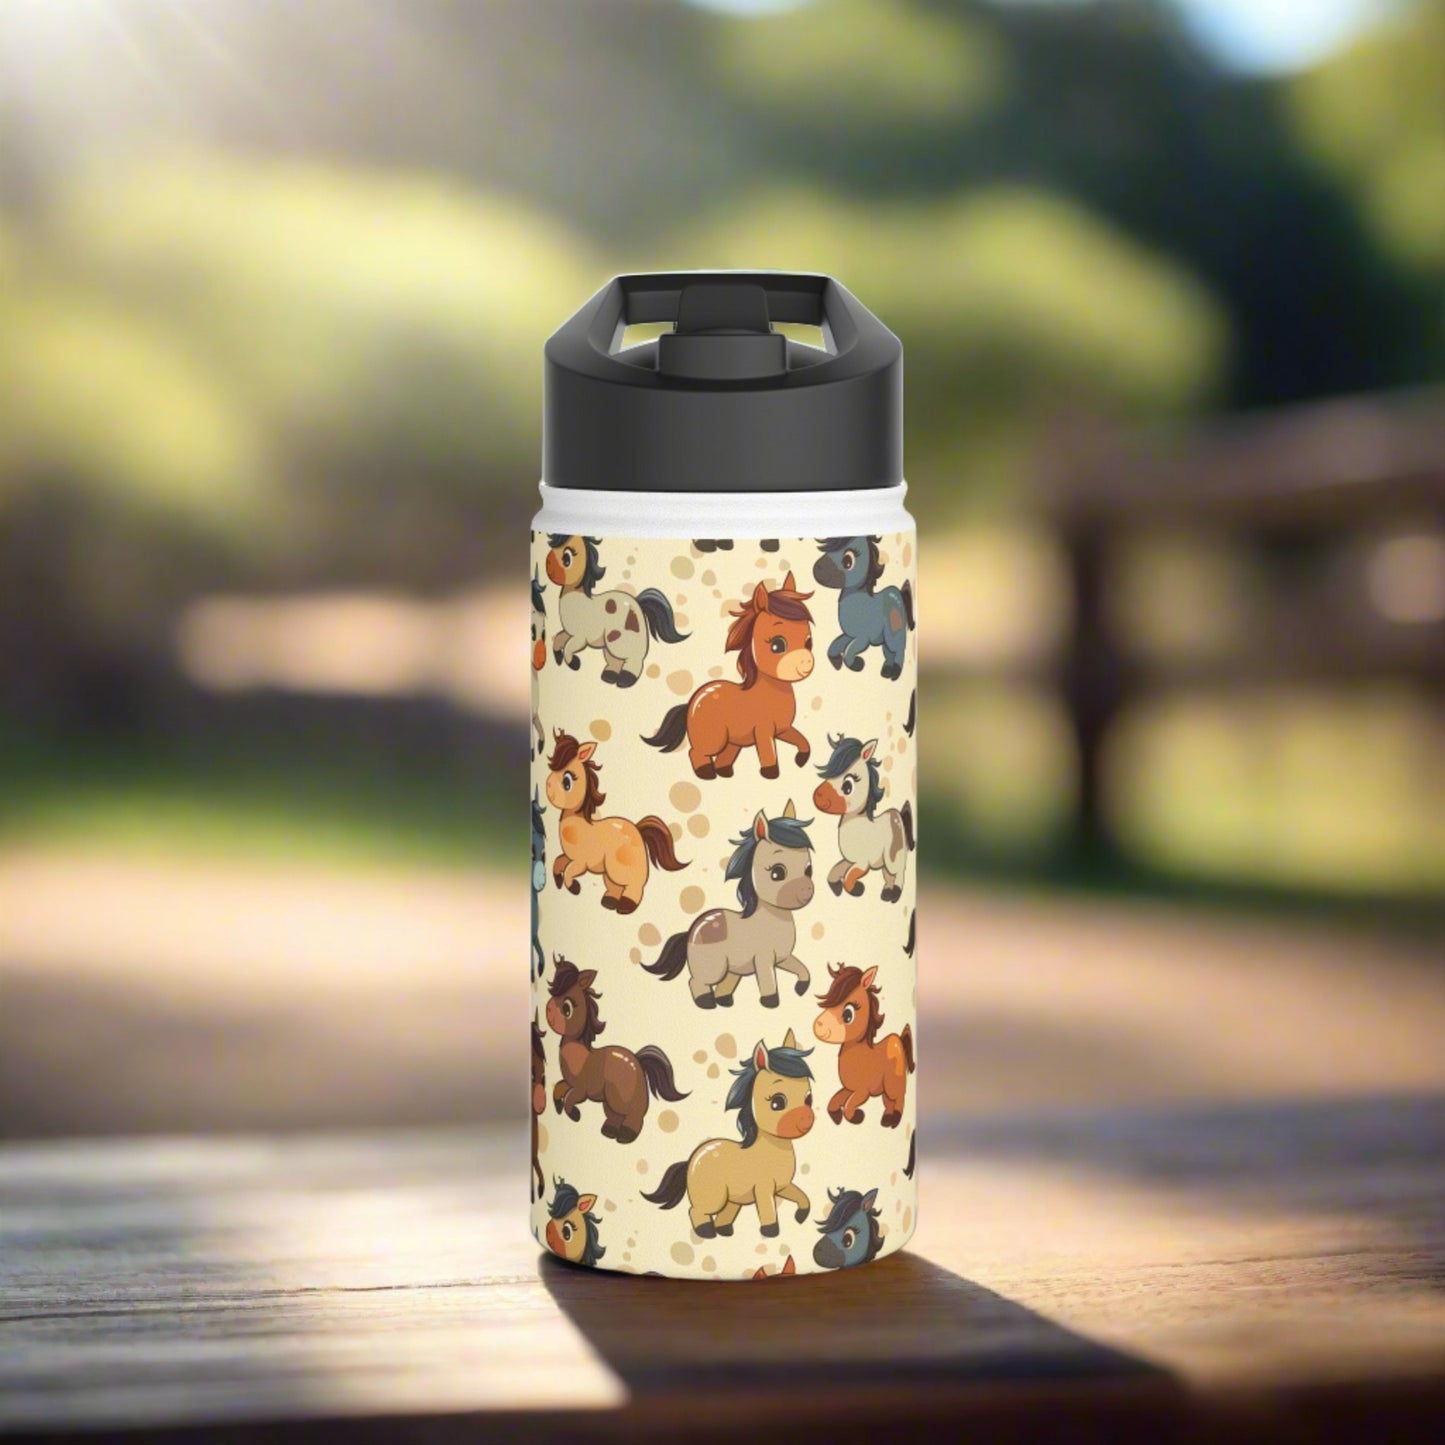 Insulated Water Bottle, 12oz, Cute Baby Horses - Double Walled Stainless Steel Thermos, Keeps Drinks Hot or Cold